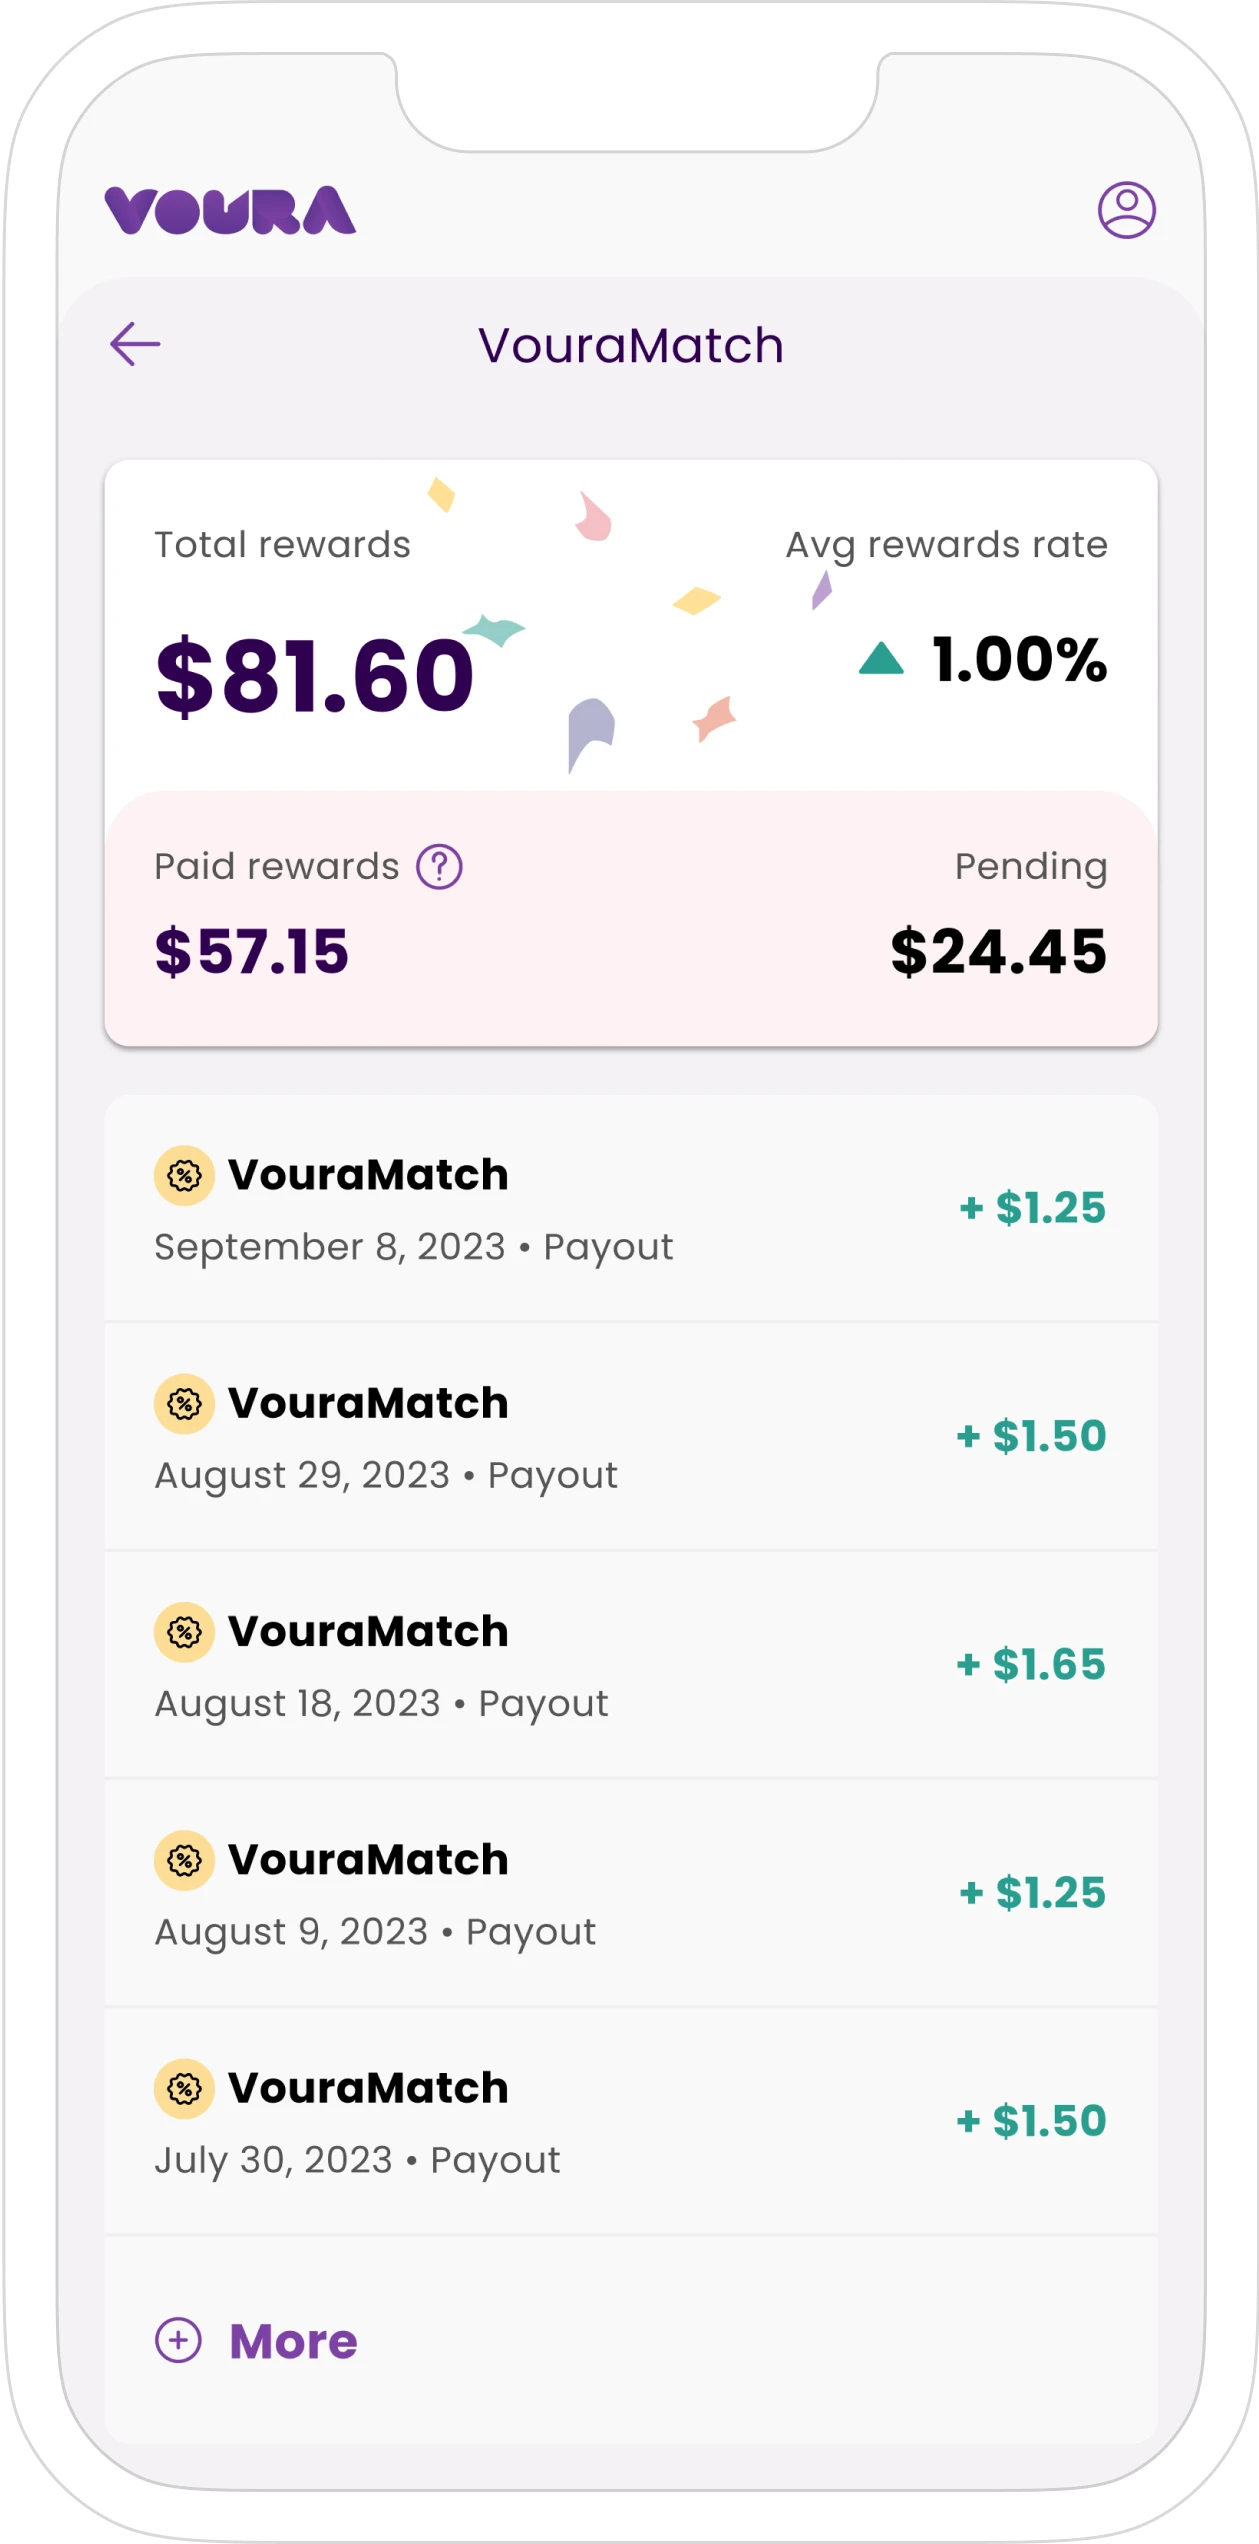 Mobile phone with VouraMatch rewards app screen, showing overview with total rewards balance of $81.60, average rewards rate of 1.00%, paid rewards of $57.15, and pending rewards of $24.45, followed by a list of transactions showing the VouraMatch payouts.